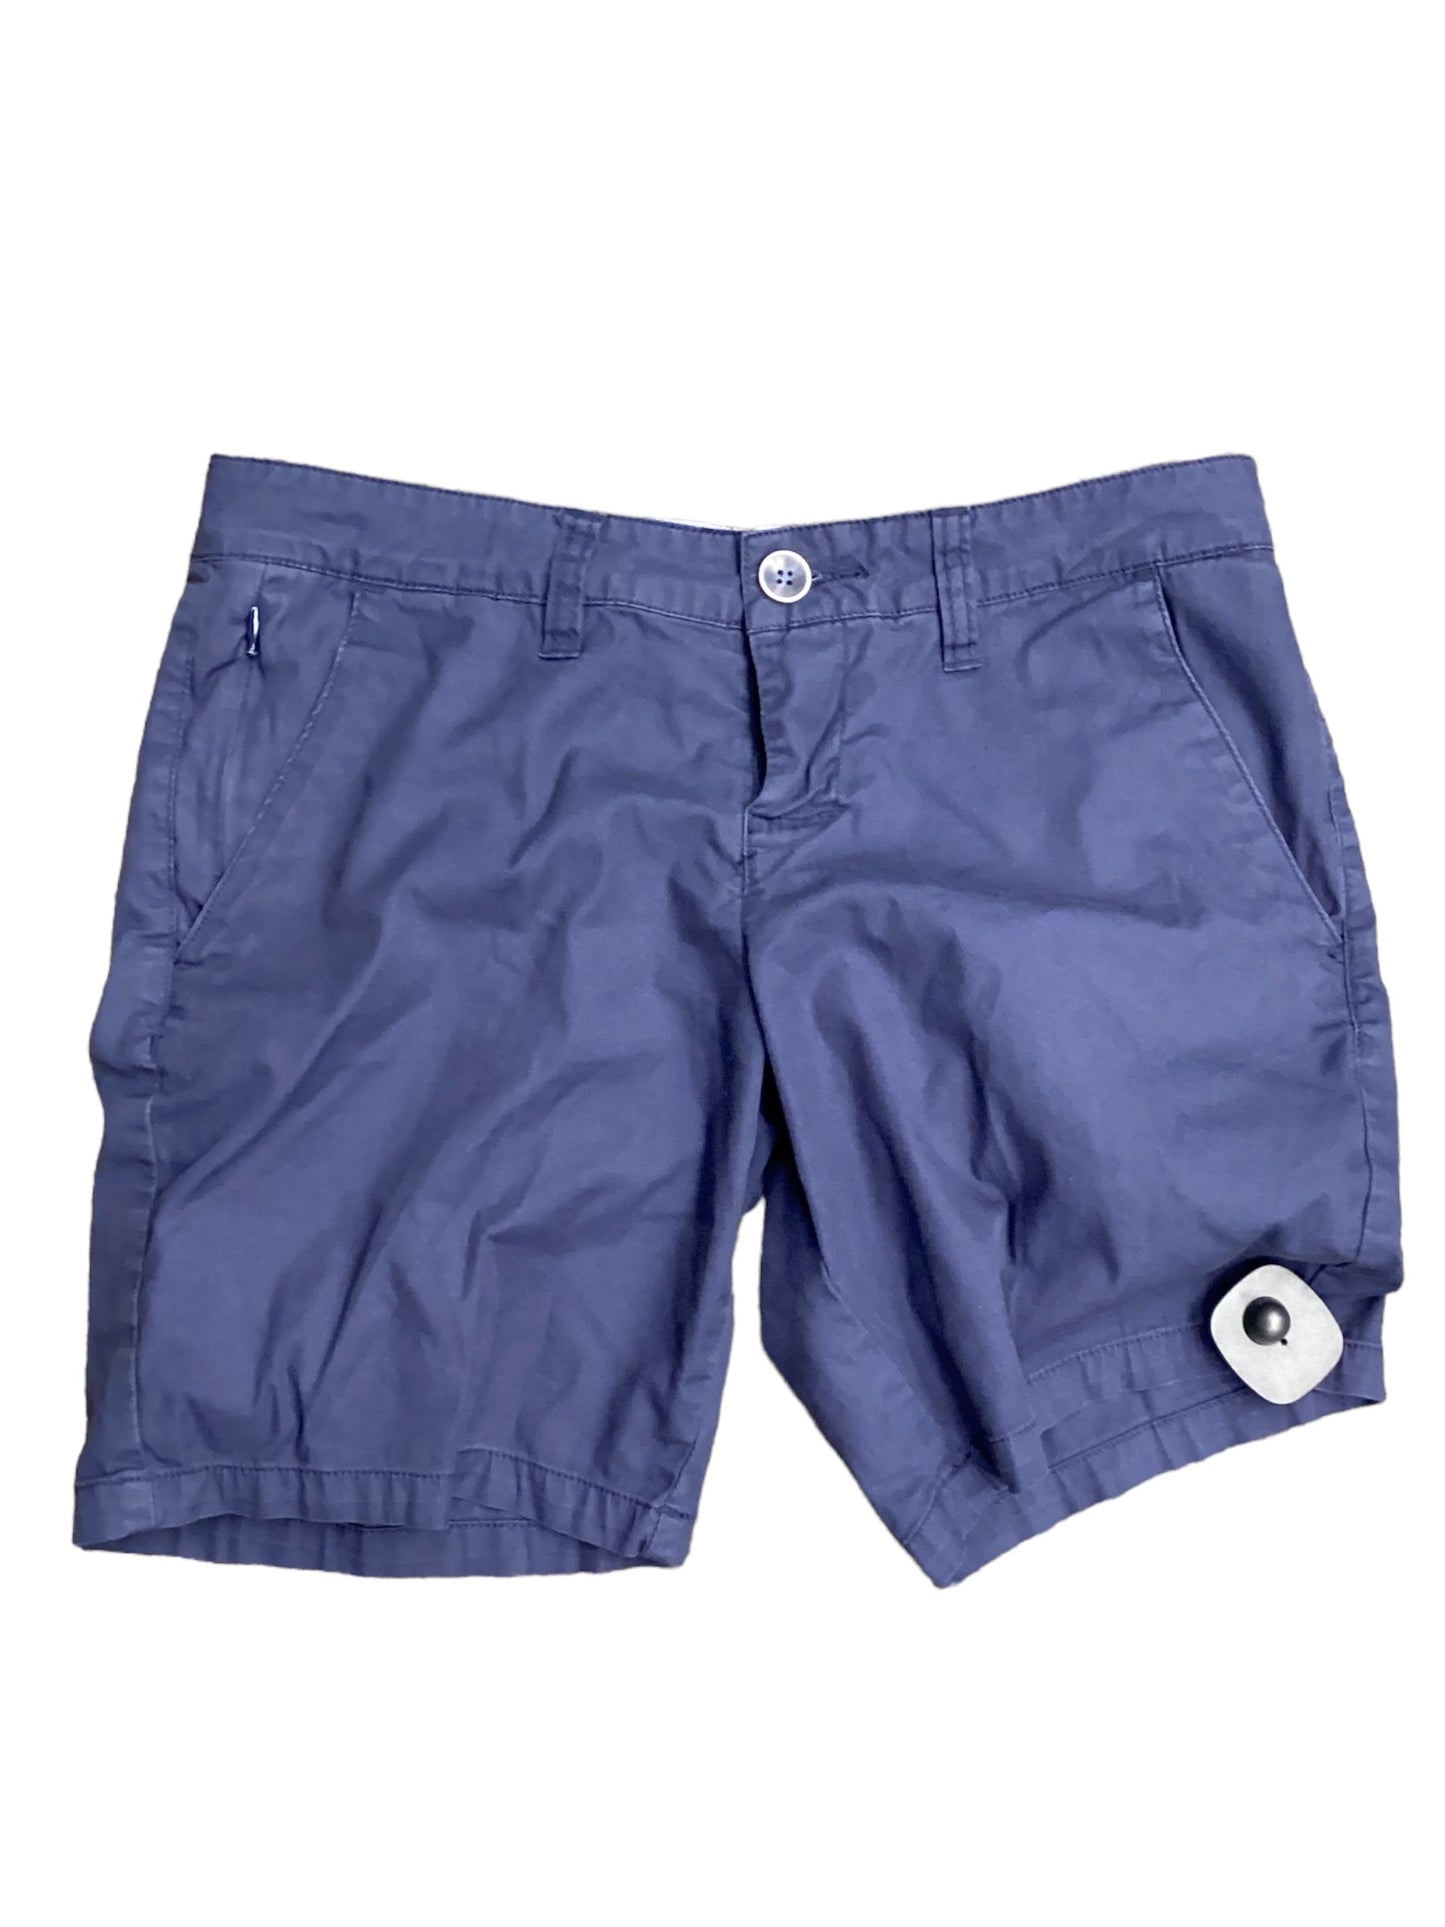 Shorts By Toad & Co  Size: 4